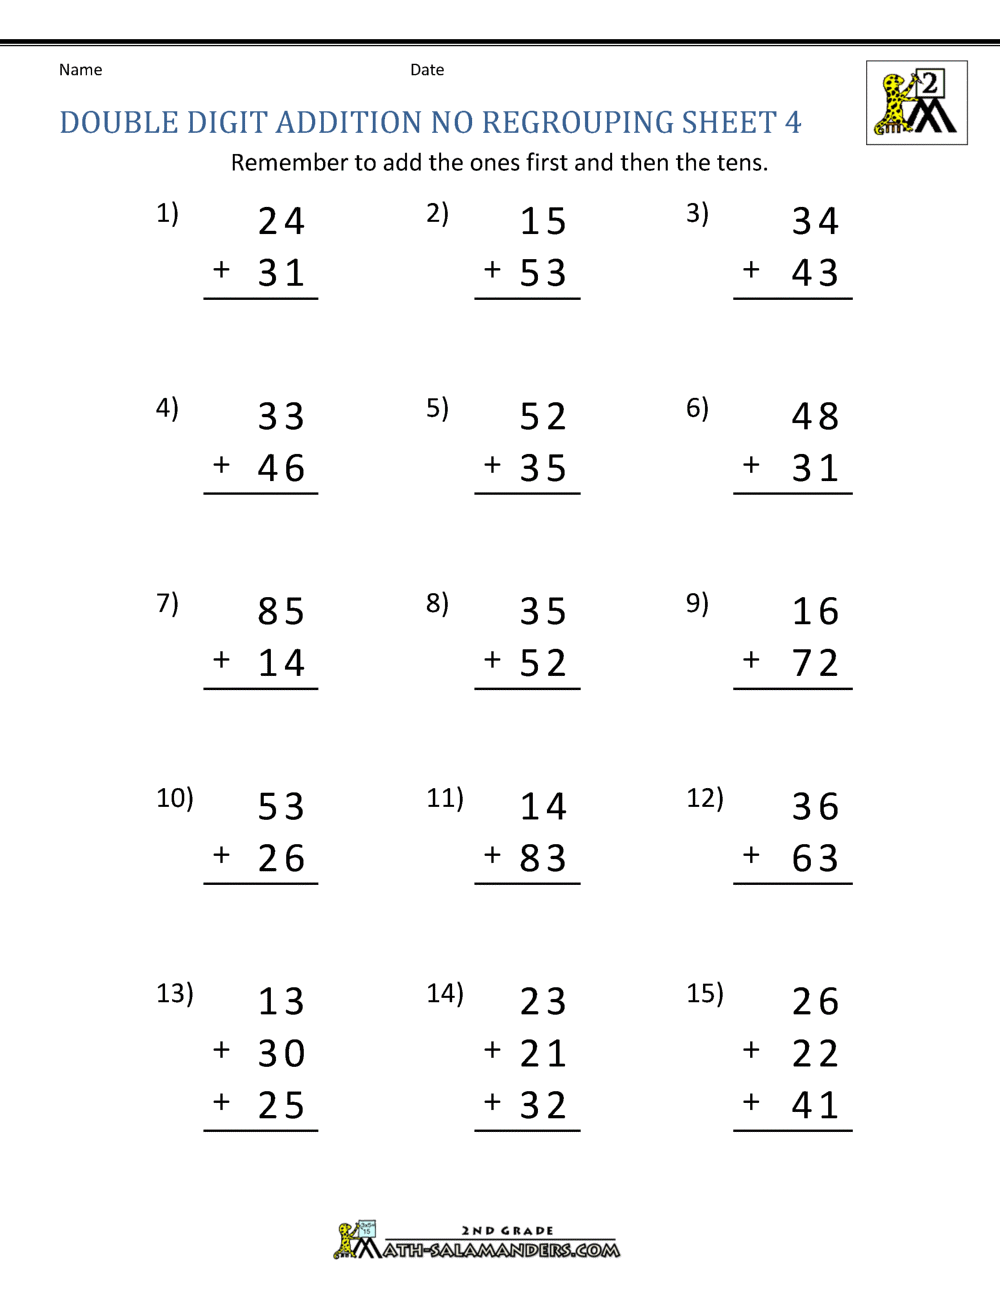 double digit addition without regrouping